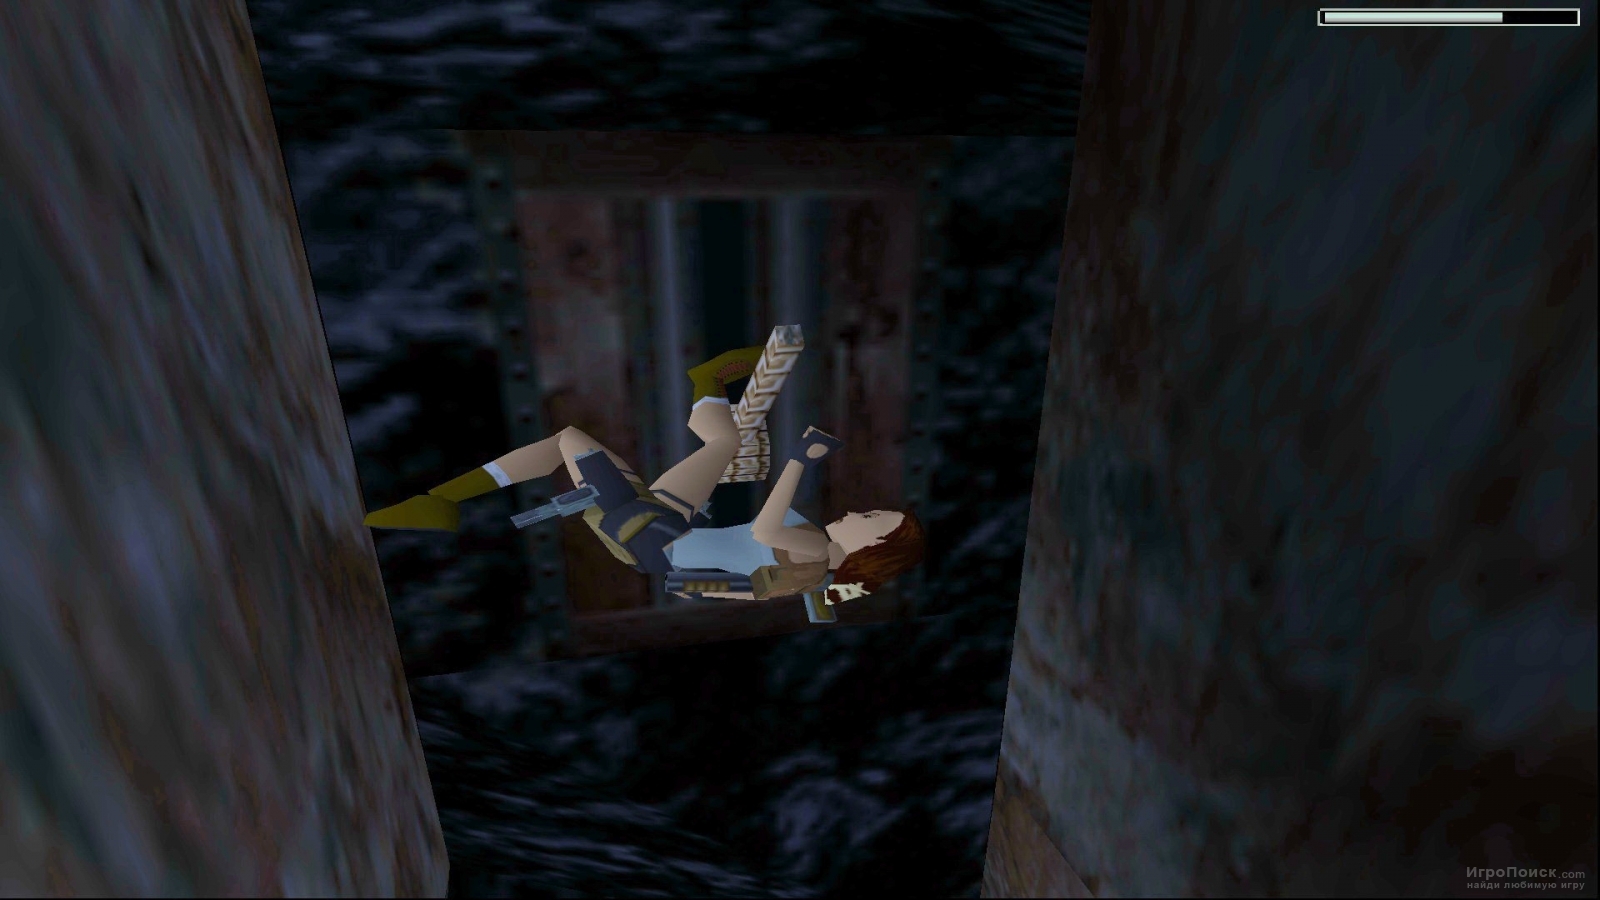    Tomb Raider: Unfinished Business